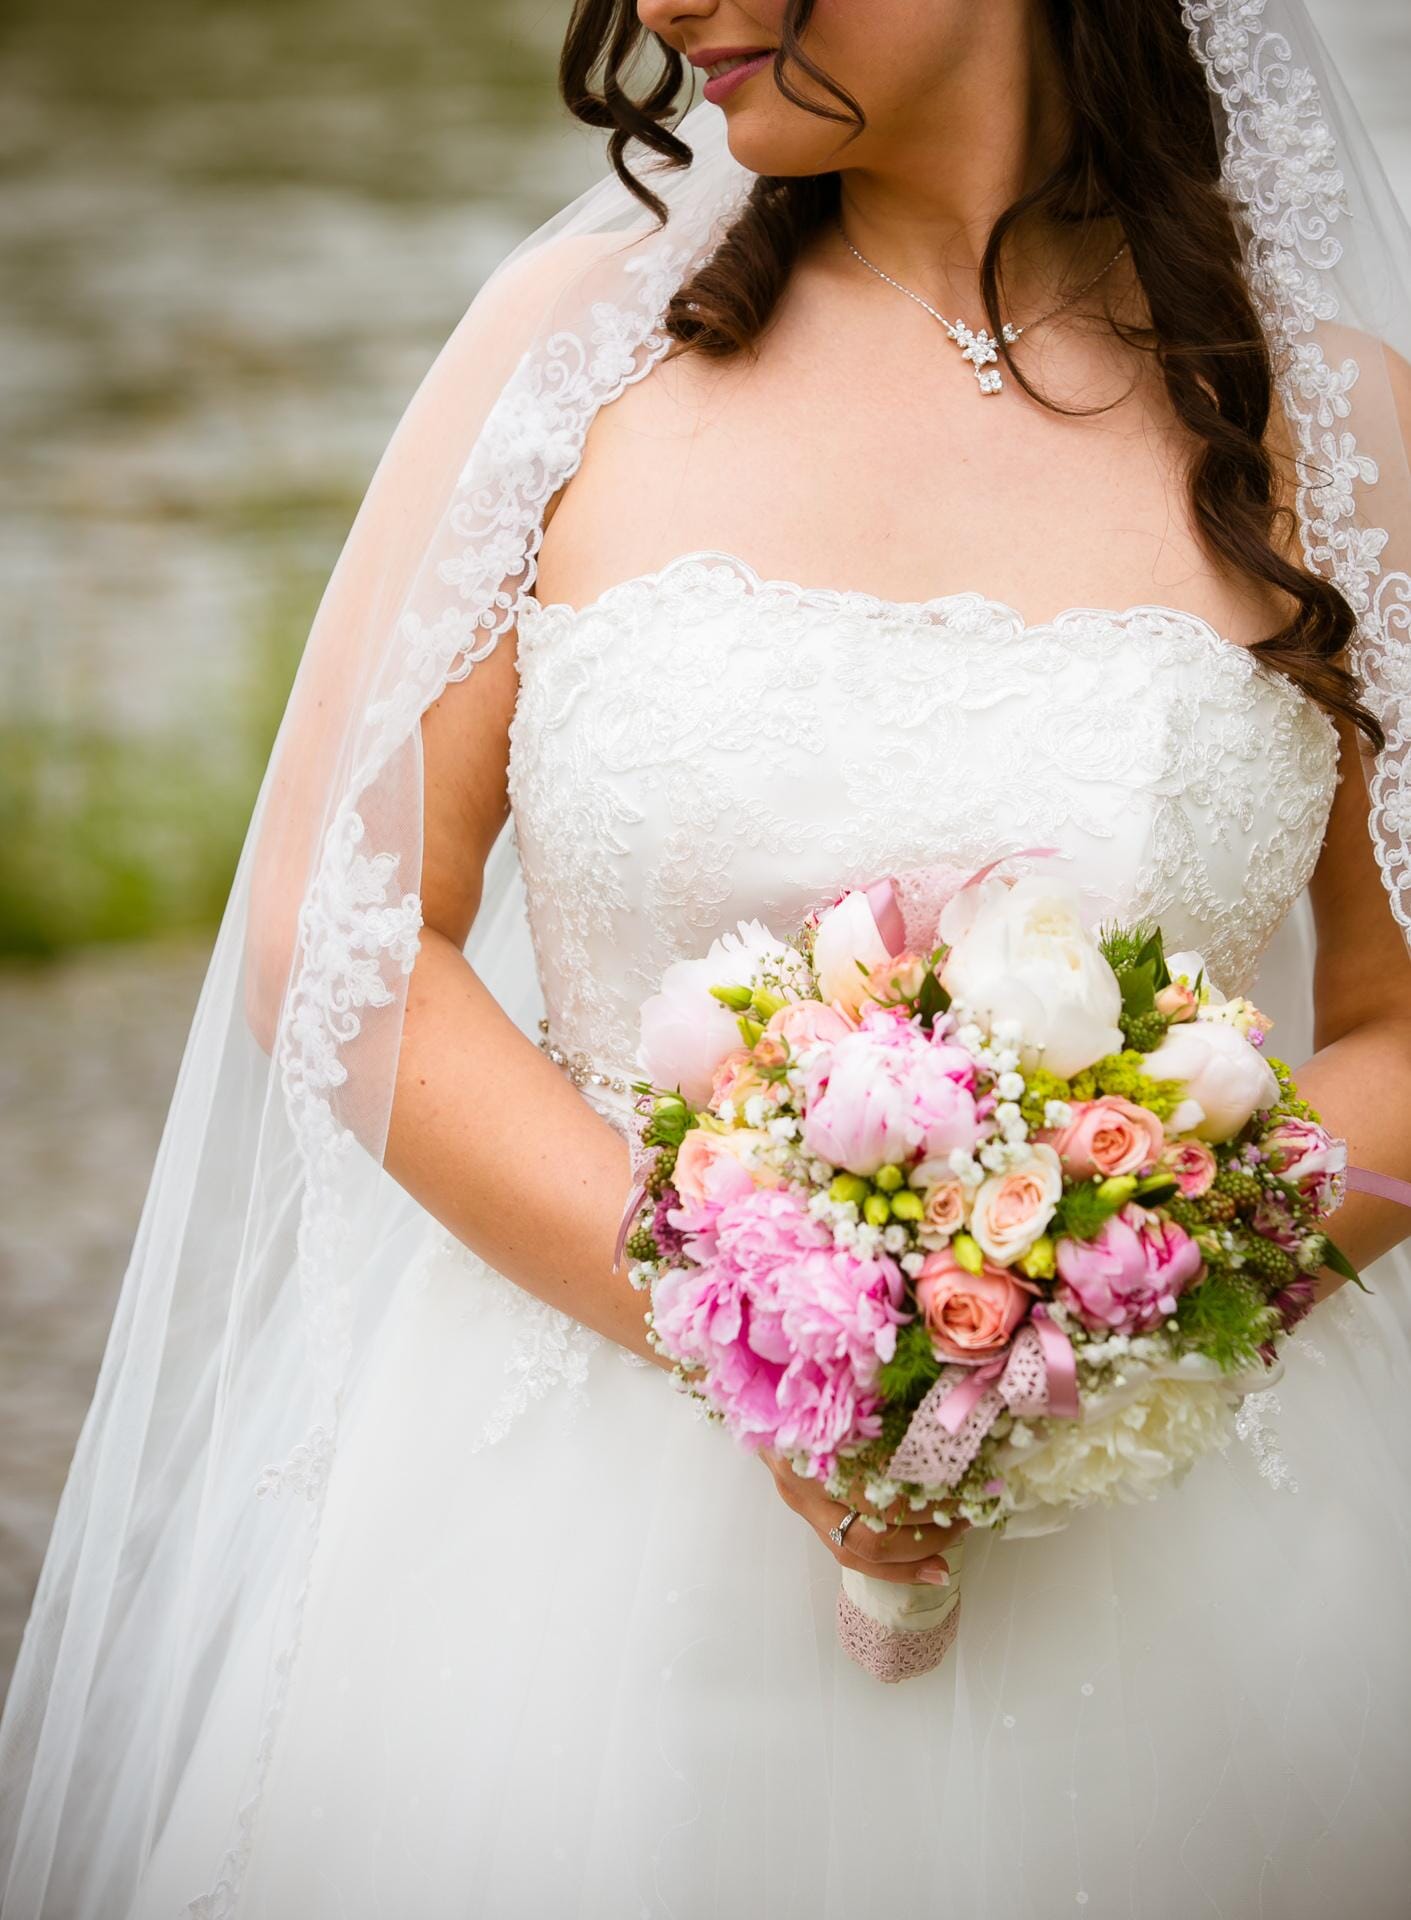 Bride and flowers